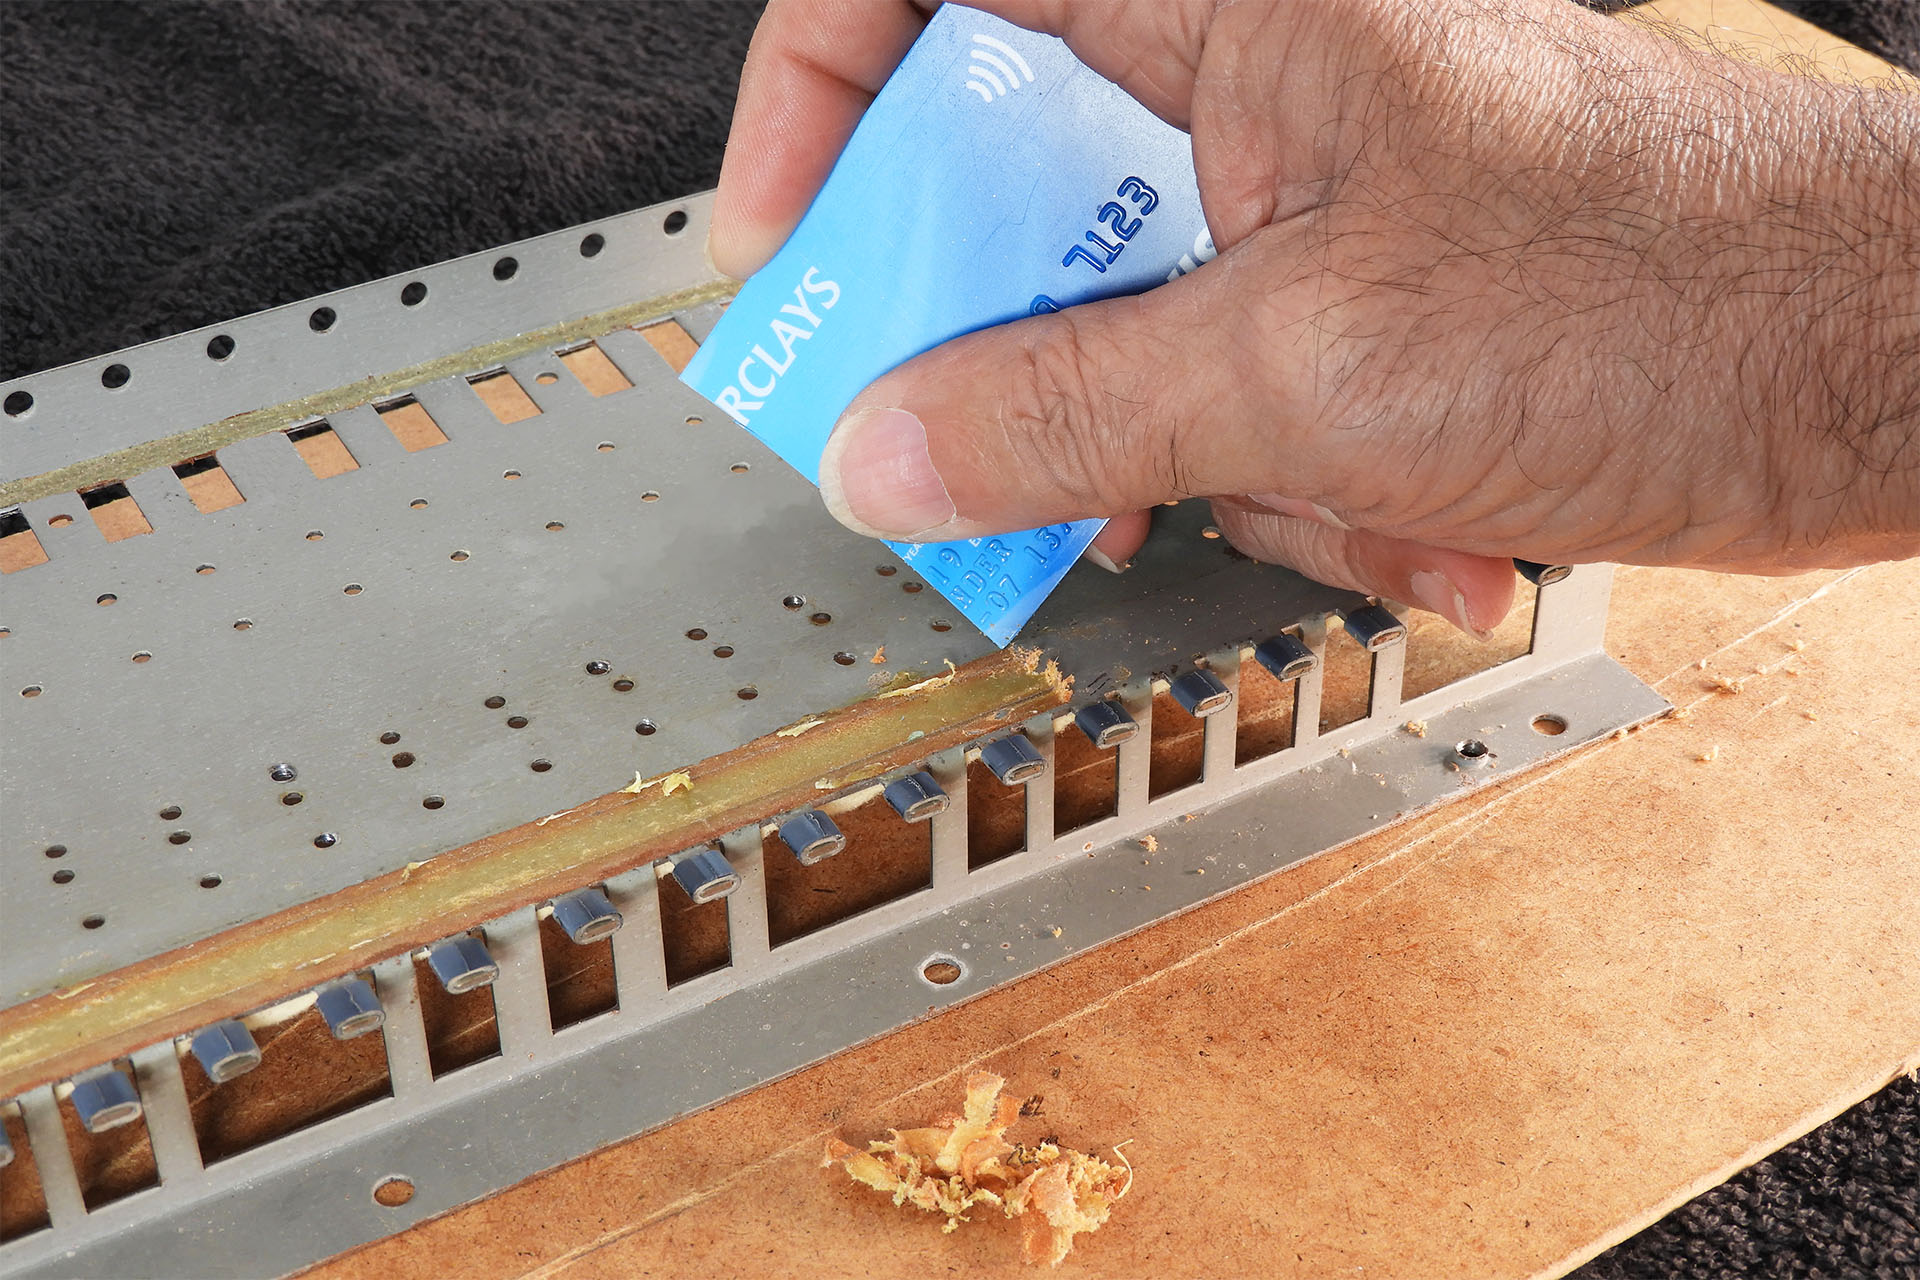 Removing glue from a JX-8P keyboard chassis with a credit card